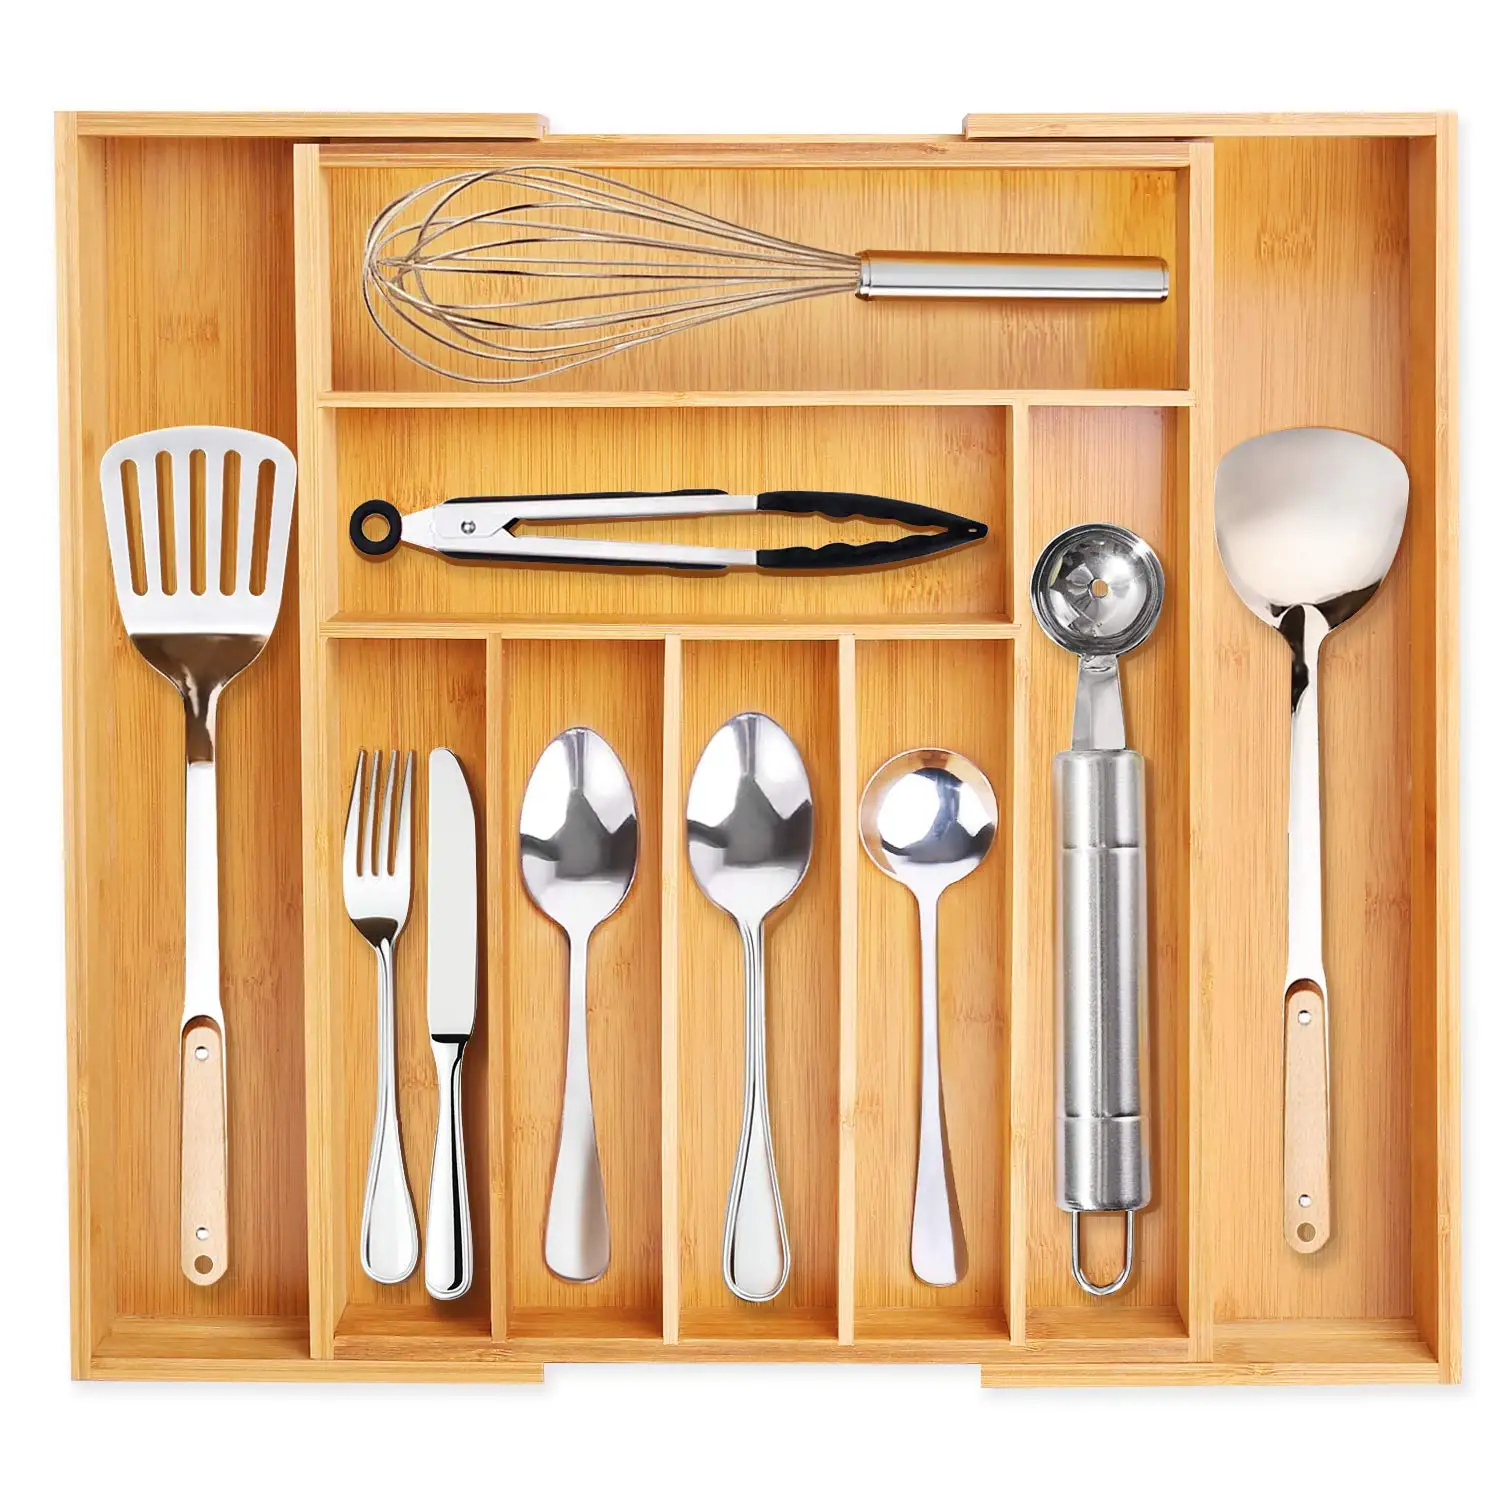 Flatware and Silverware 9 Compartments Compact Cutlery Tray Organizer Holder for Kitchen Utensils Kitchen Drawer Organizer Bamboo Expandable Utensil Silverware Organizer 